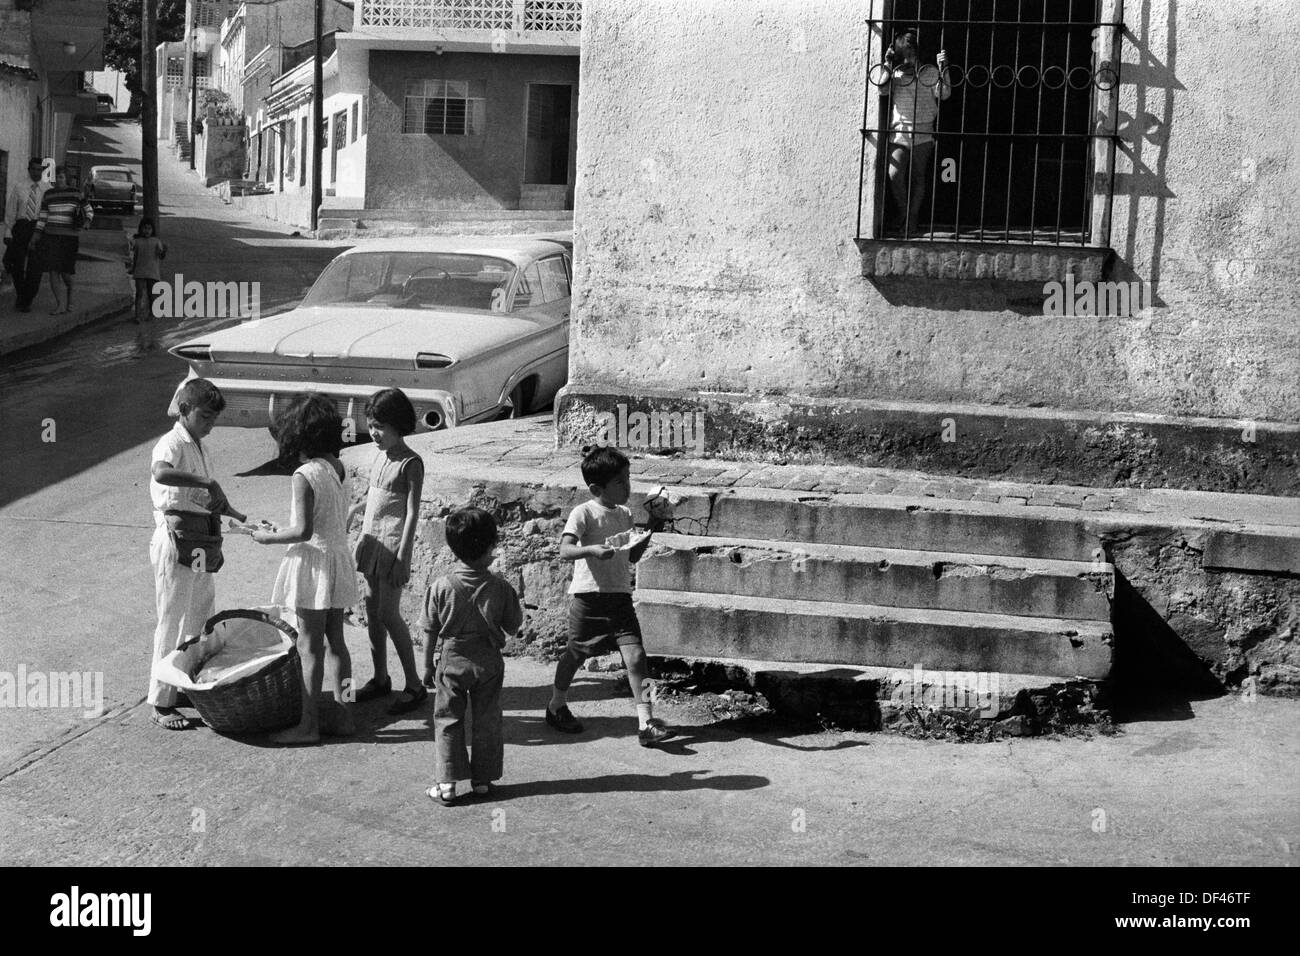 Mazatlan Mexico 1970s. Teen boy working selling food snacks to other children.  Rich, poor, poverty  economic divide.  1973 State of Sinaloa,   HOMER SYKES Stock Photo